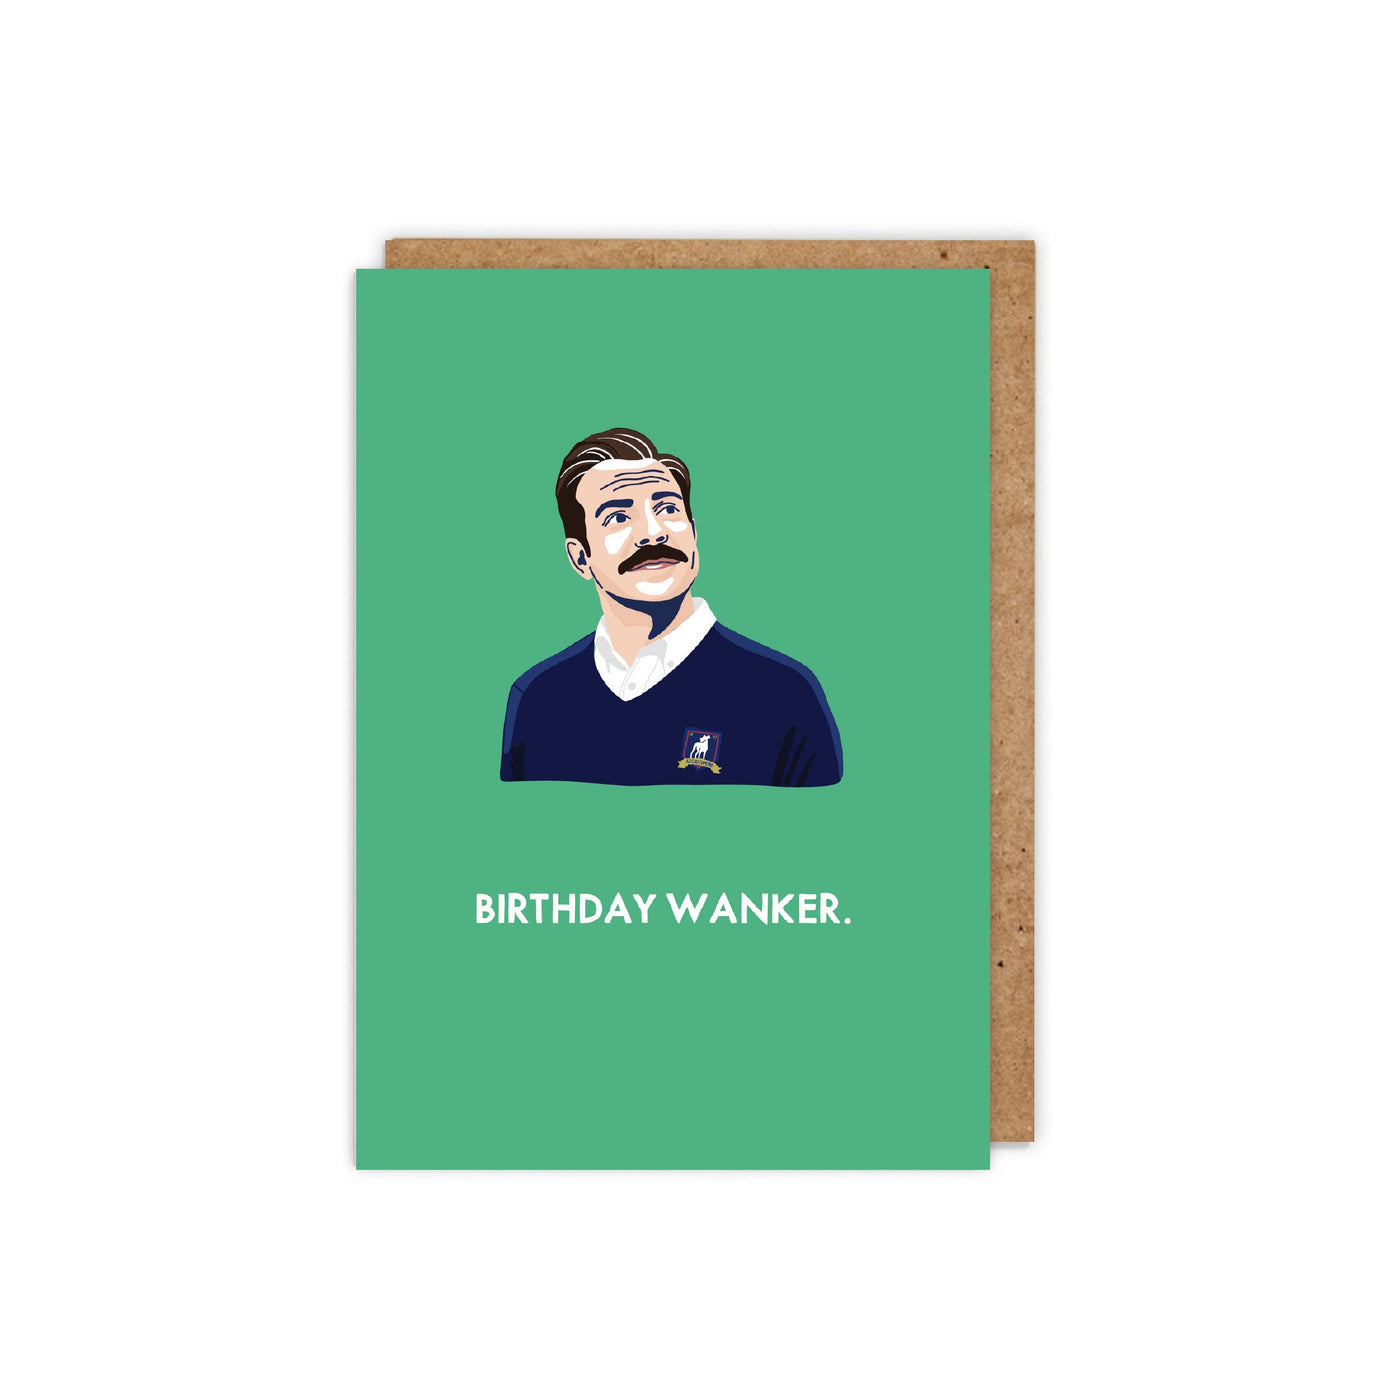 Ted Lasso 'Birthday Wanker' funny Celebrity greetings card